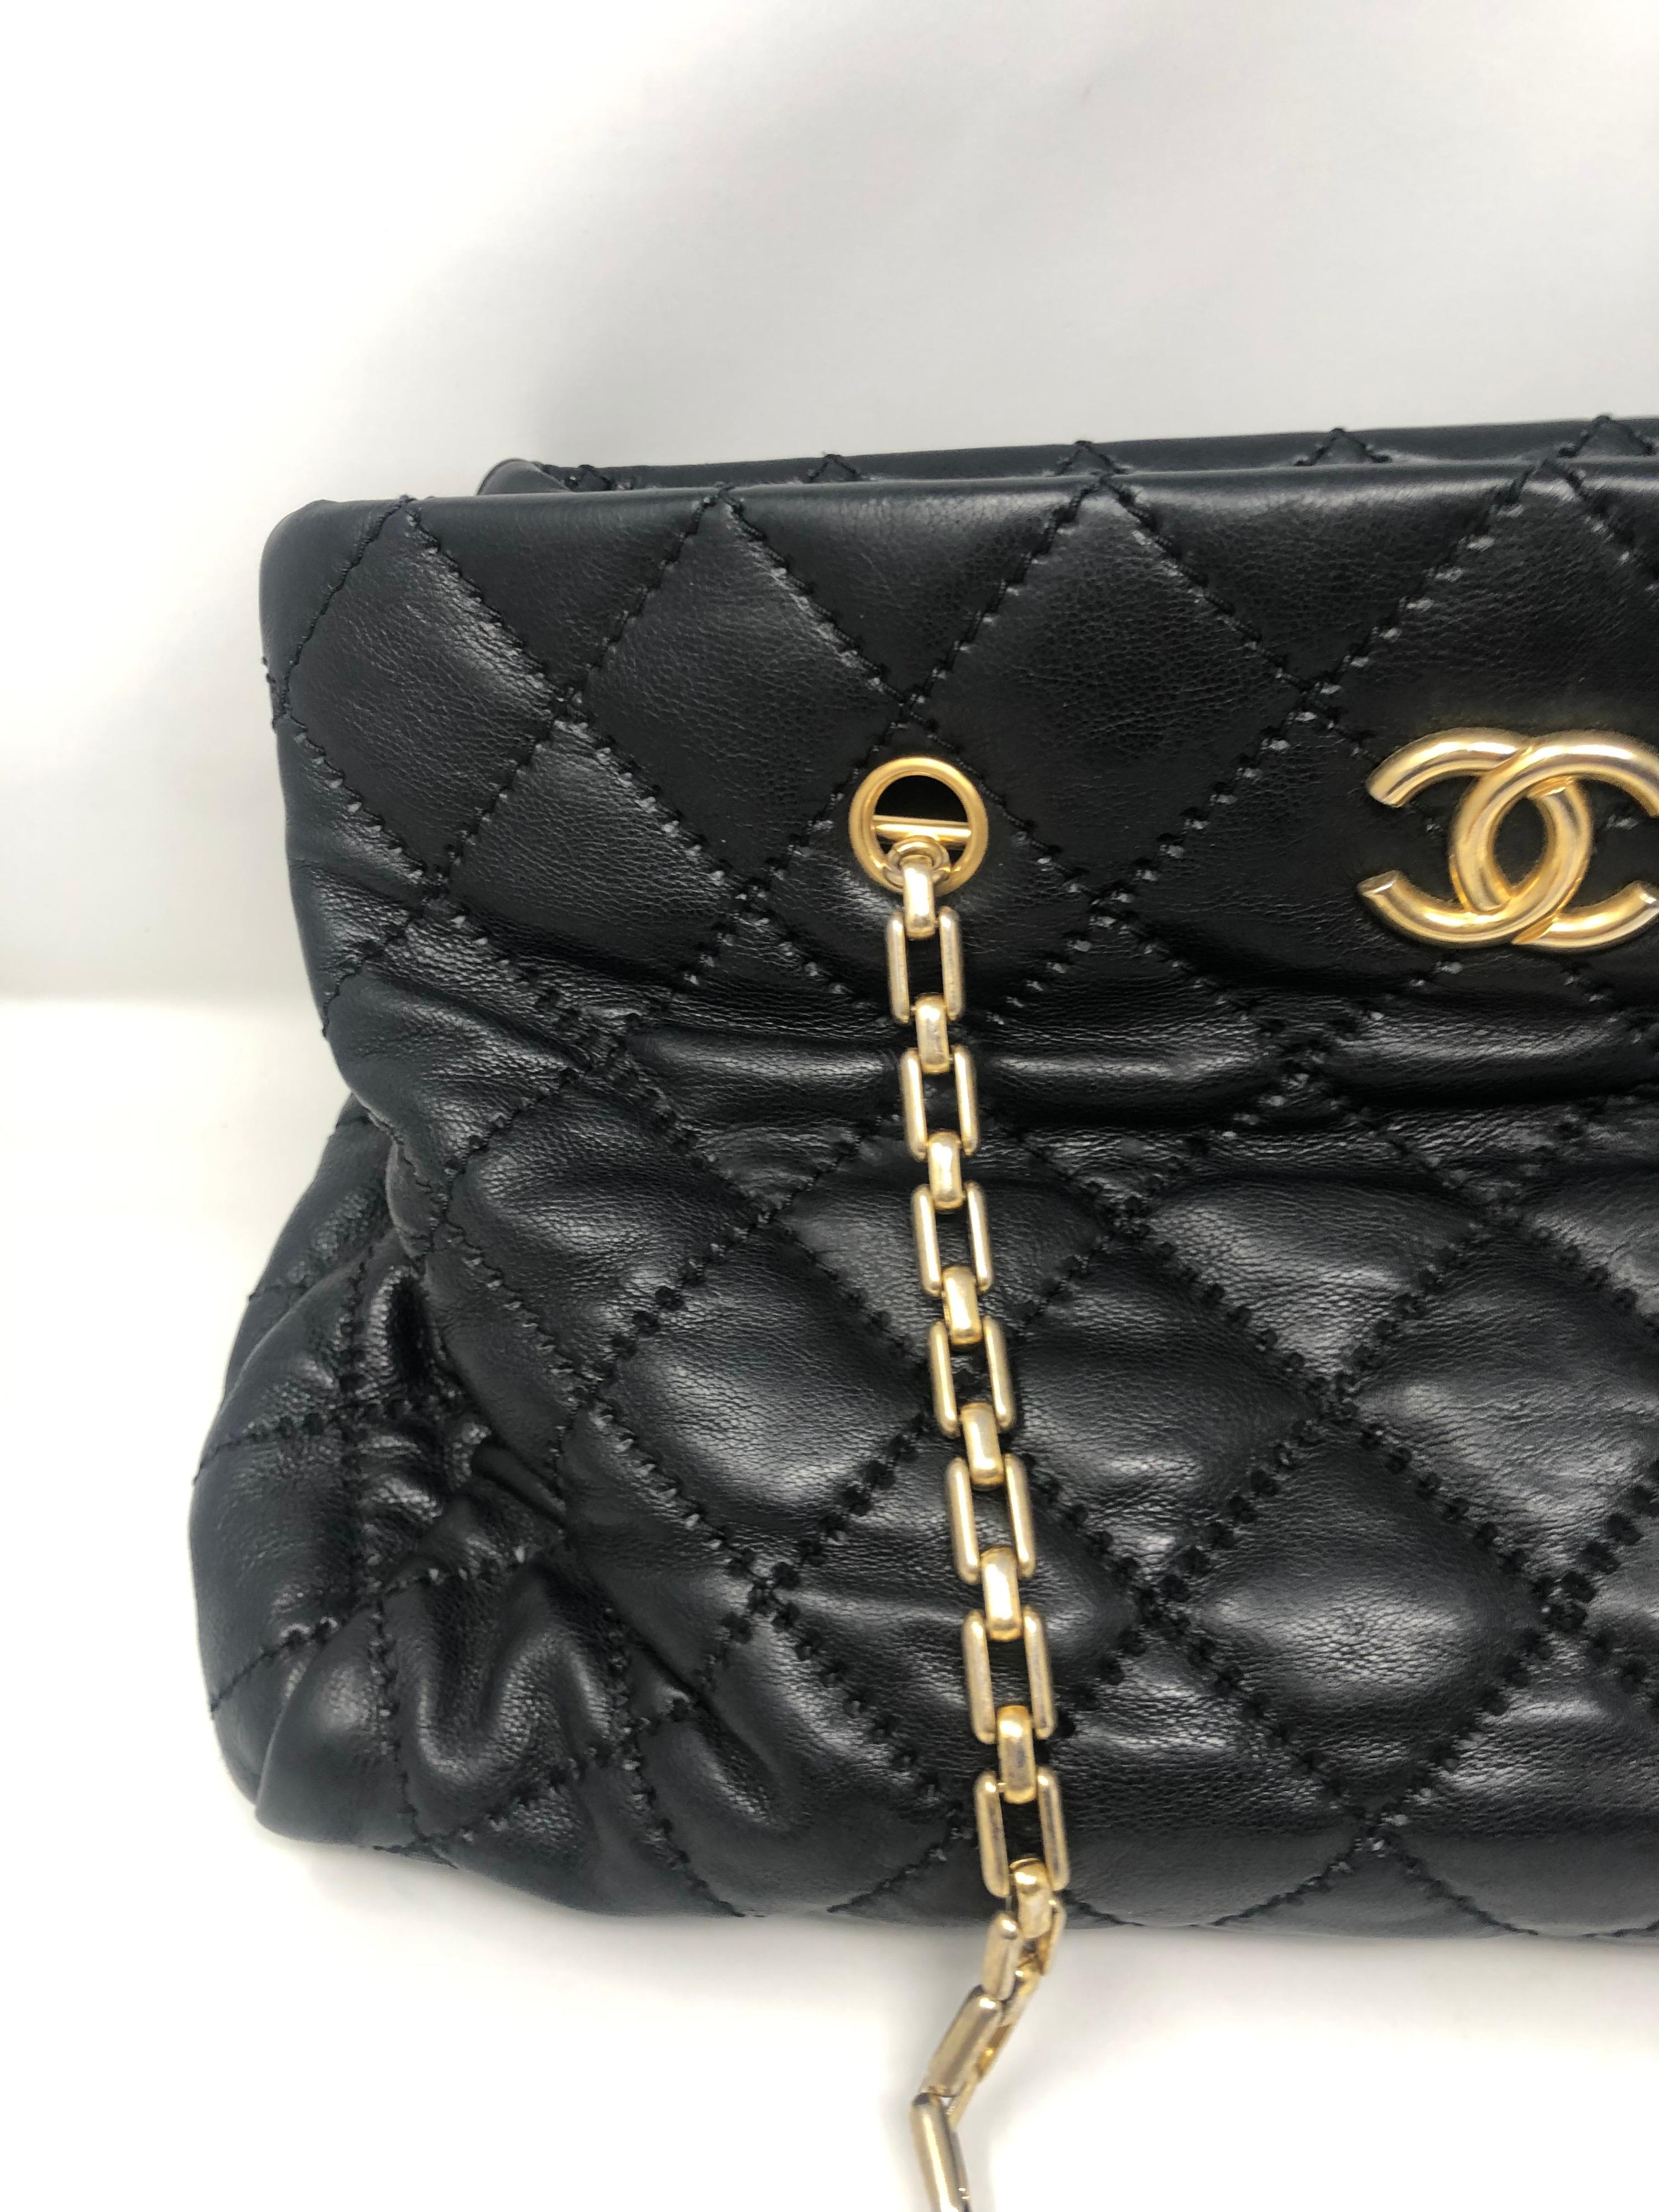 Women's or Men's Chanel Black Leather Tote 